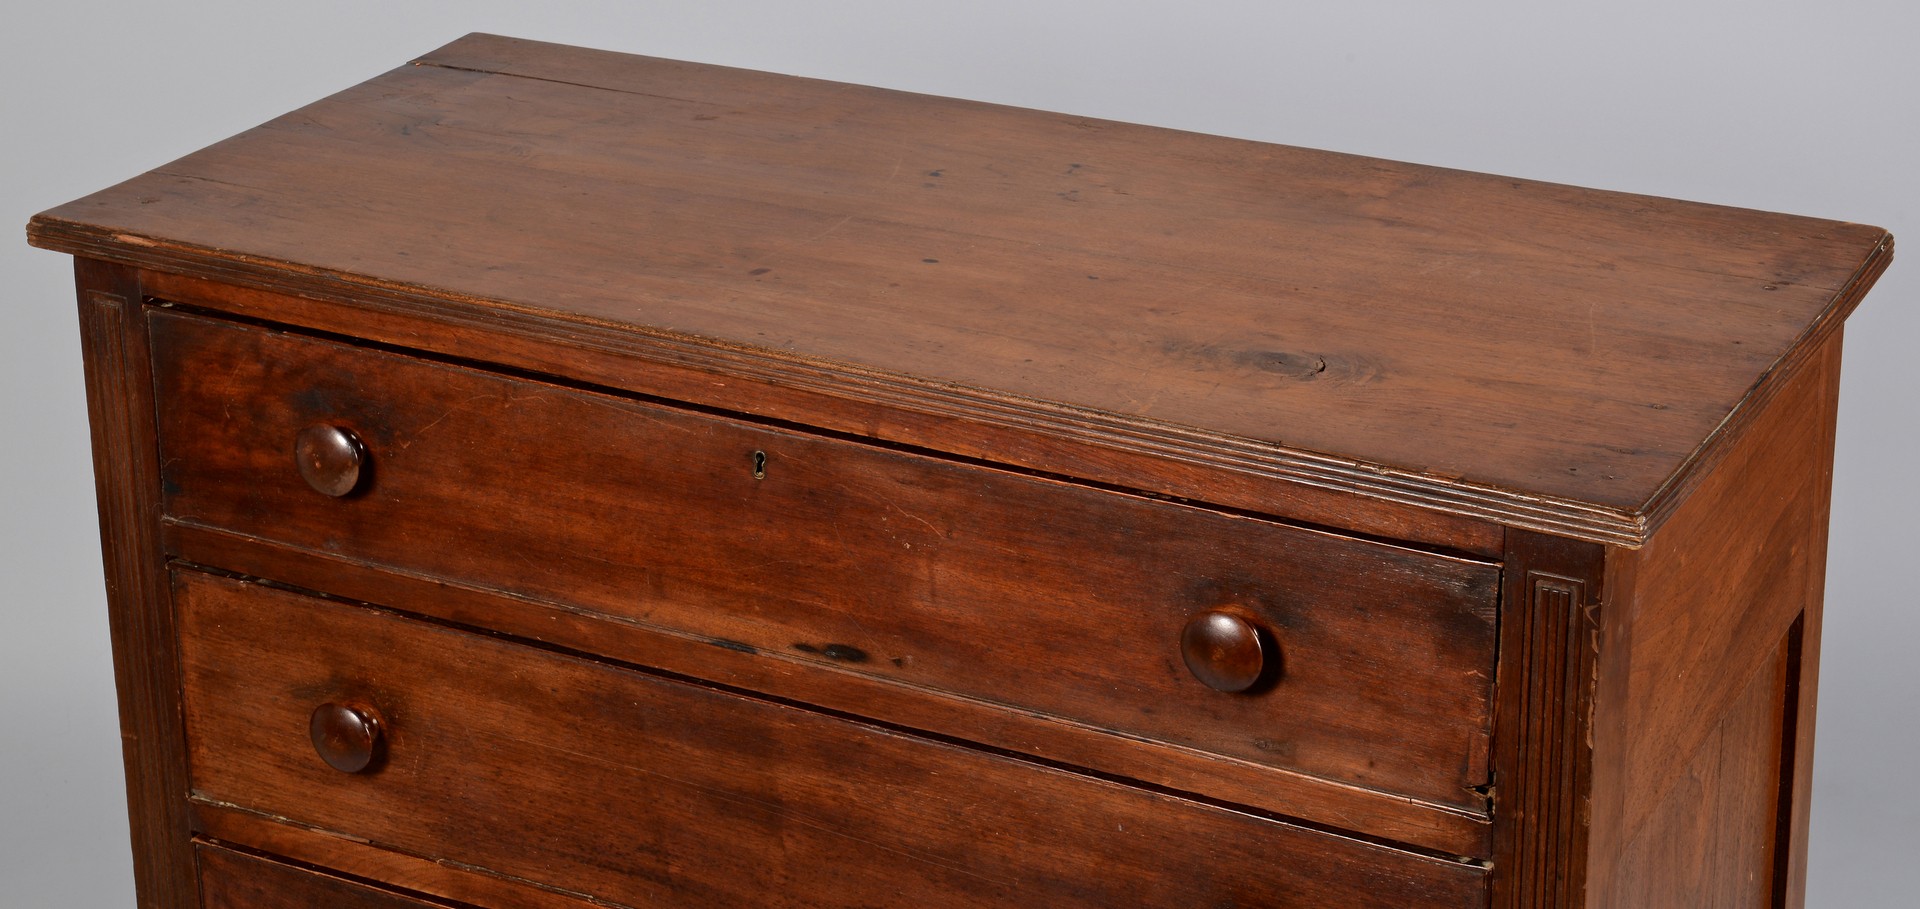 Lot 106: Kentucky walnut chest of drawers, reeded stiles